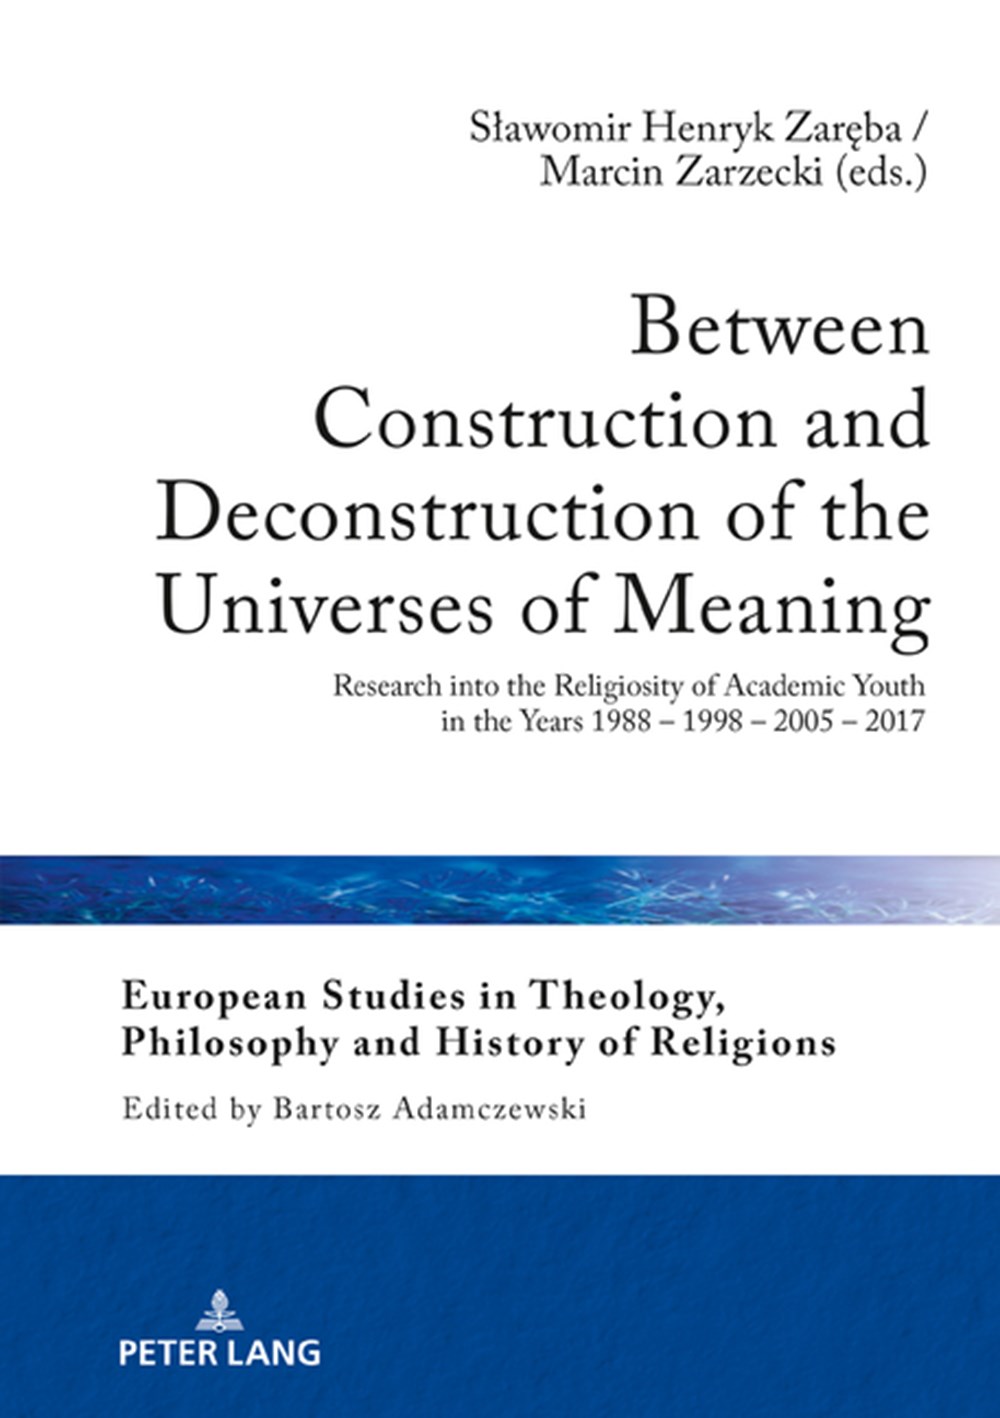 Between Construction and Deconstruction of the Universes of Meaning: Research into the Religiosity o